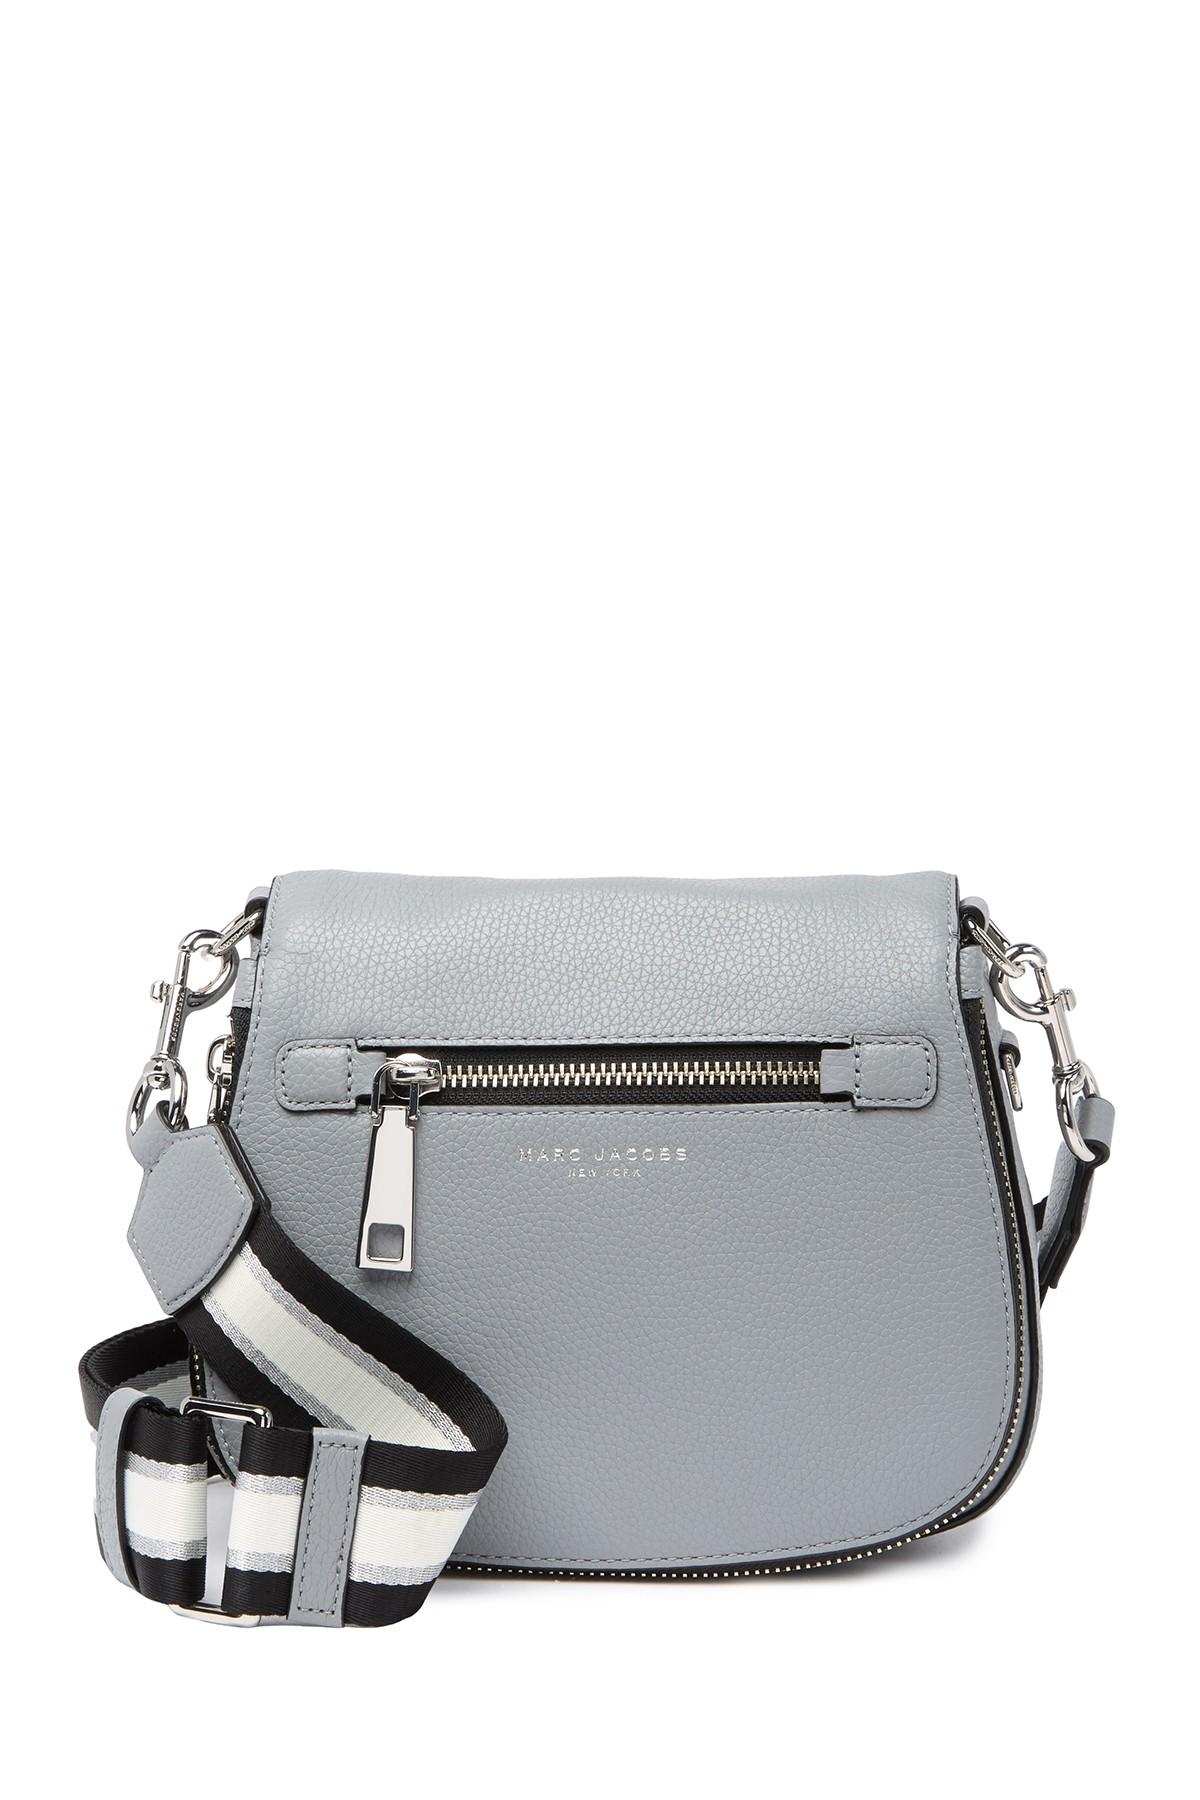 Marc Jacobs Small Nomad Gotham Leather Crossbody Bag - Lyst